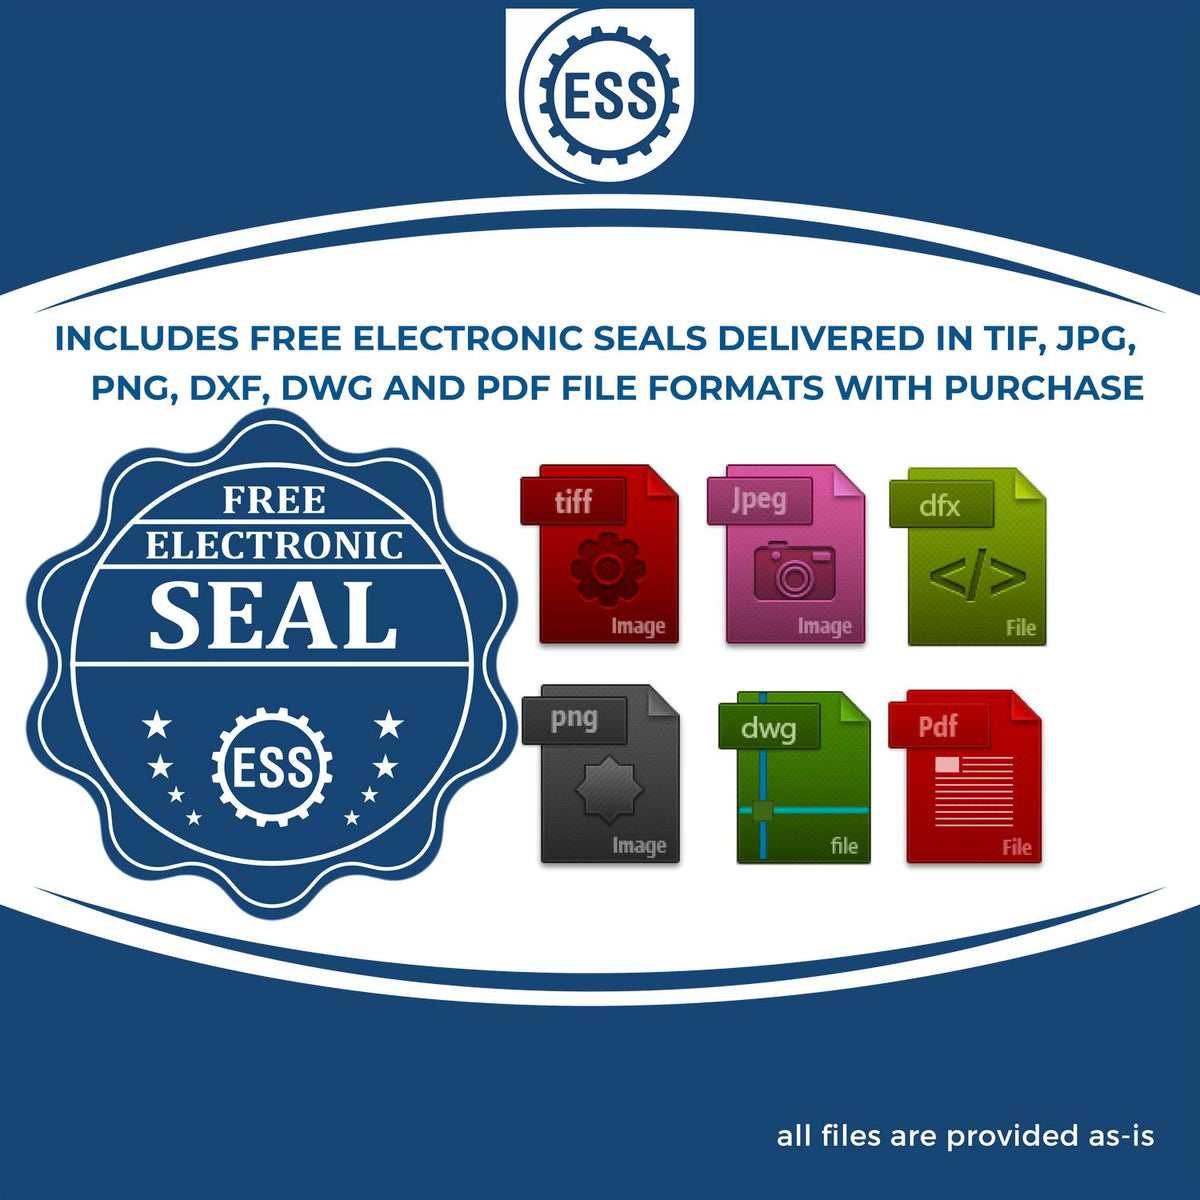 An infographic for the free electronic seal for the Missouri Engineer Desk Seal illustrating the different file type icons such as DXF, DWG, TIF, JPG and PNG.